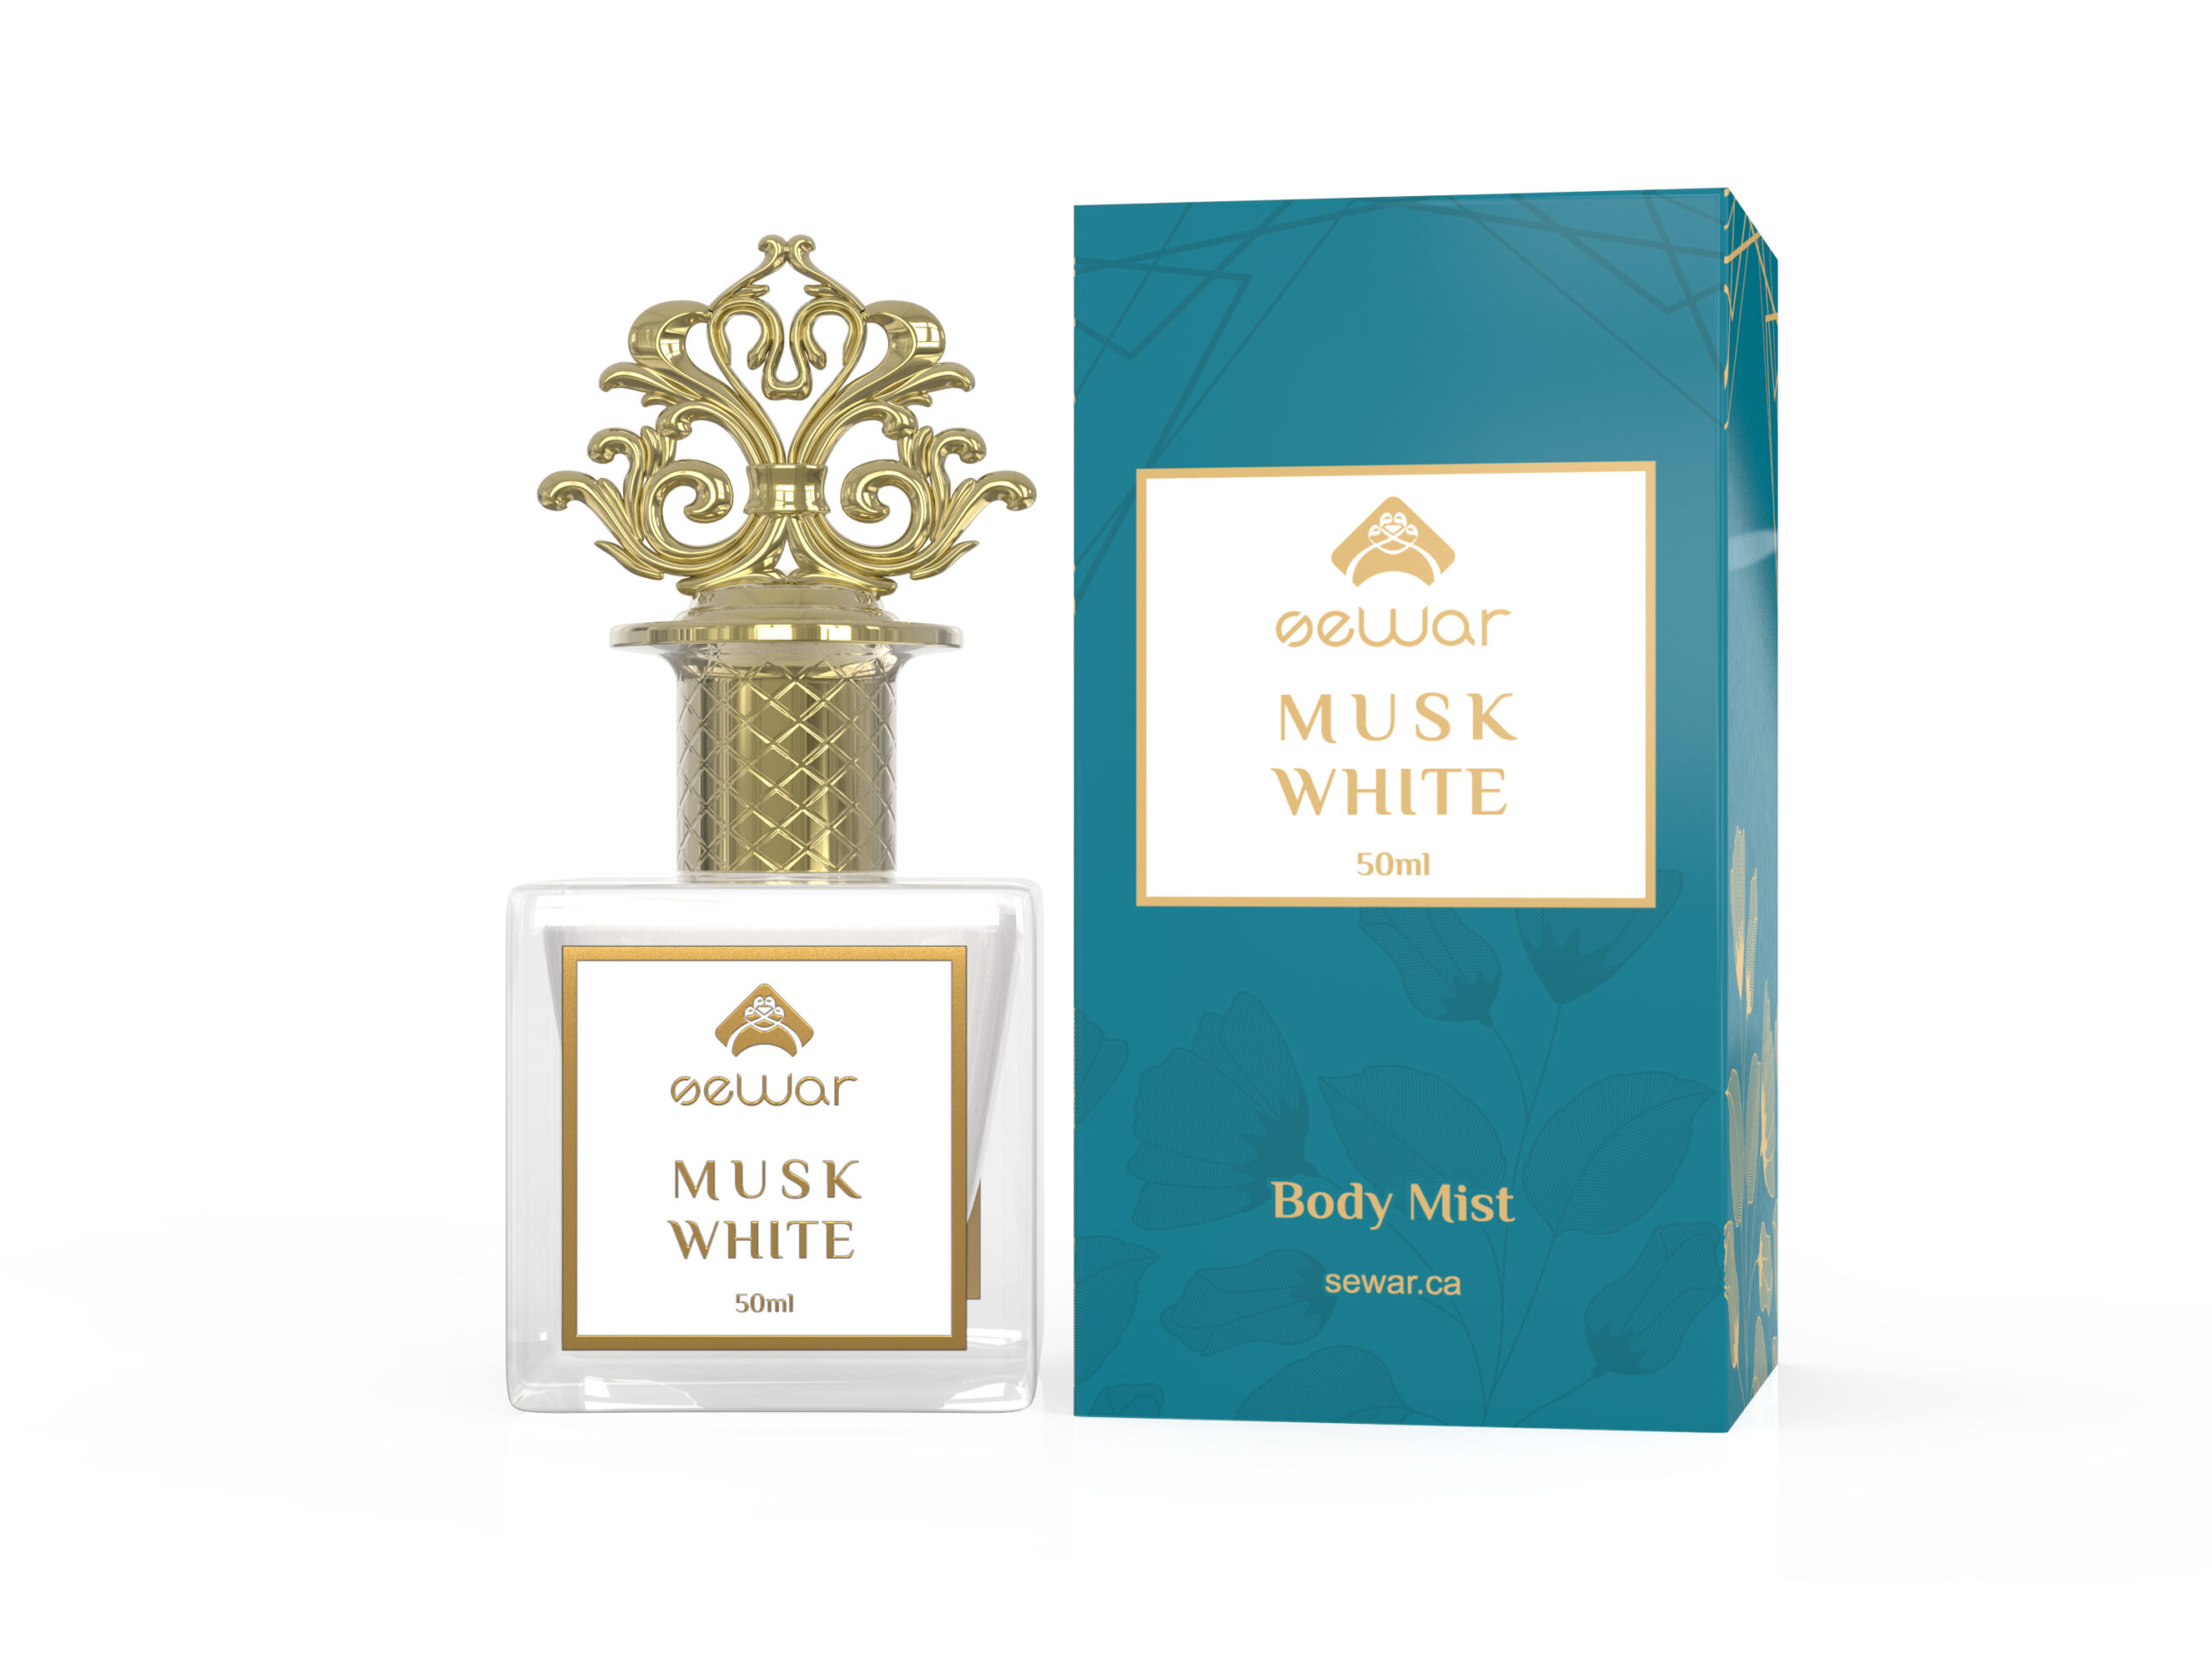 White Musk Body Mist by Sewar with Clean and Soft Musk Notes